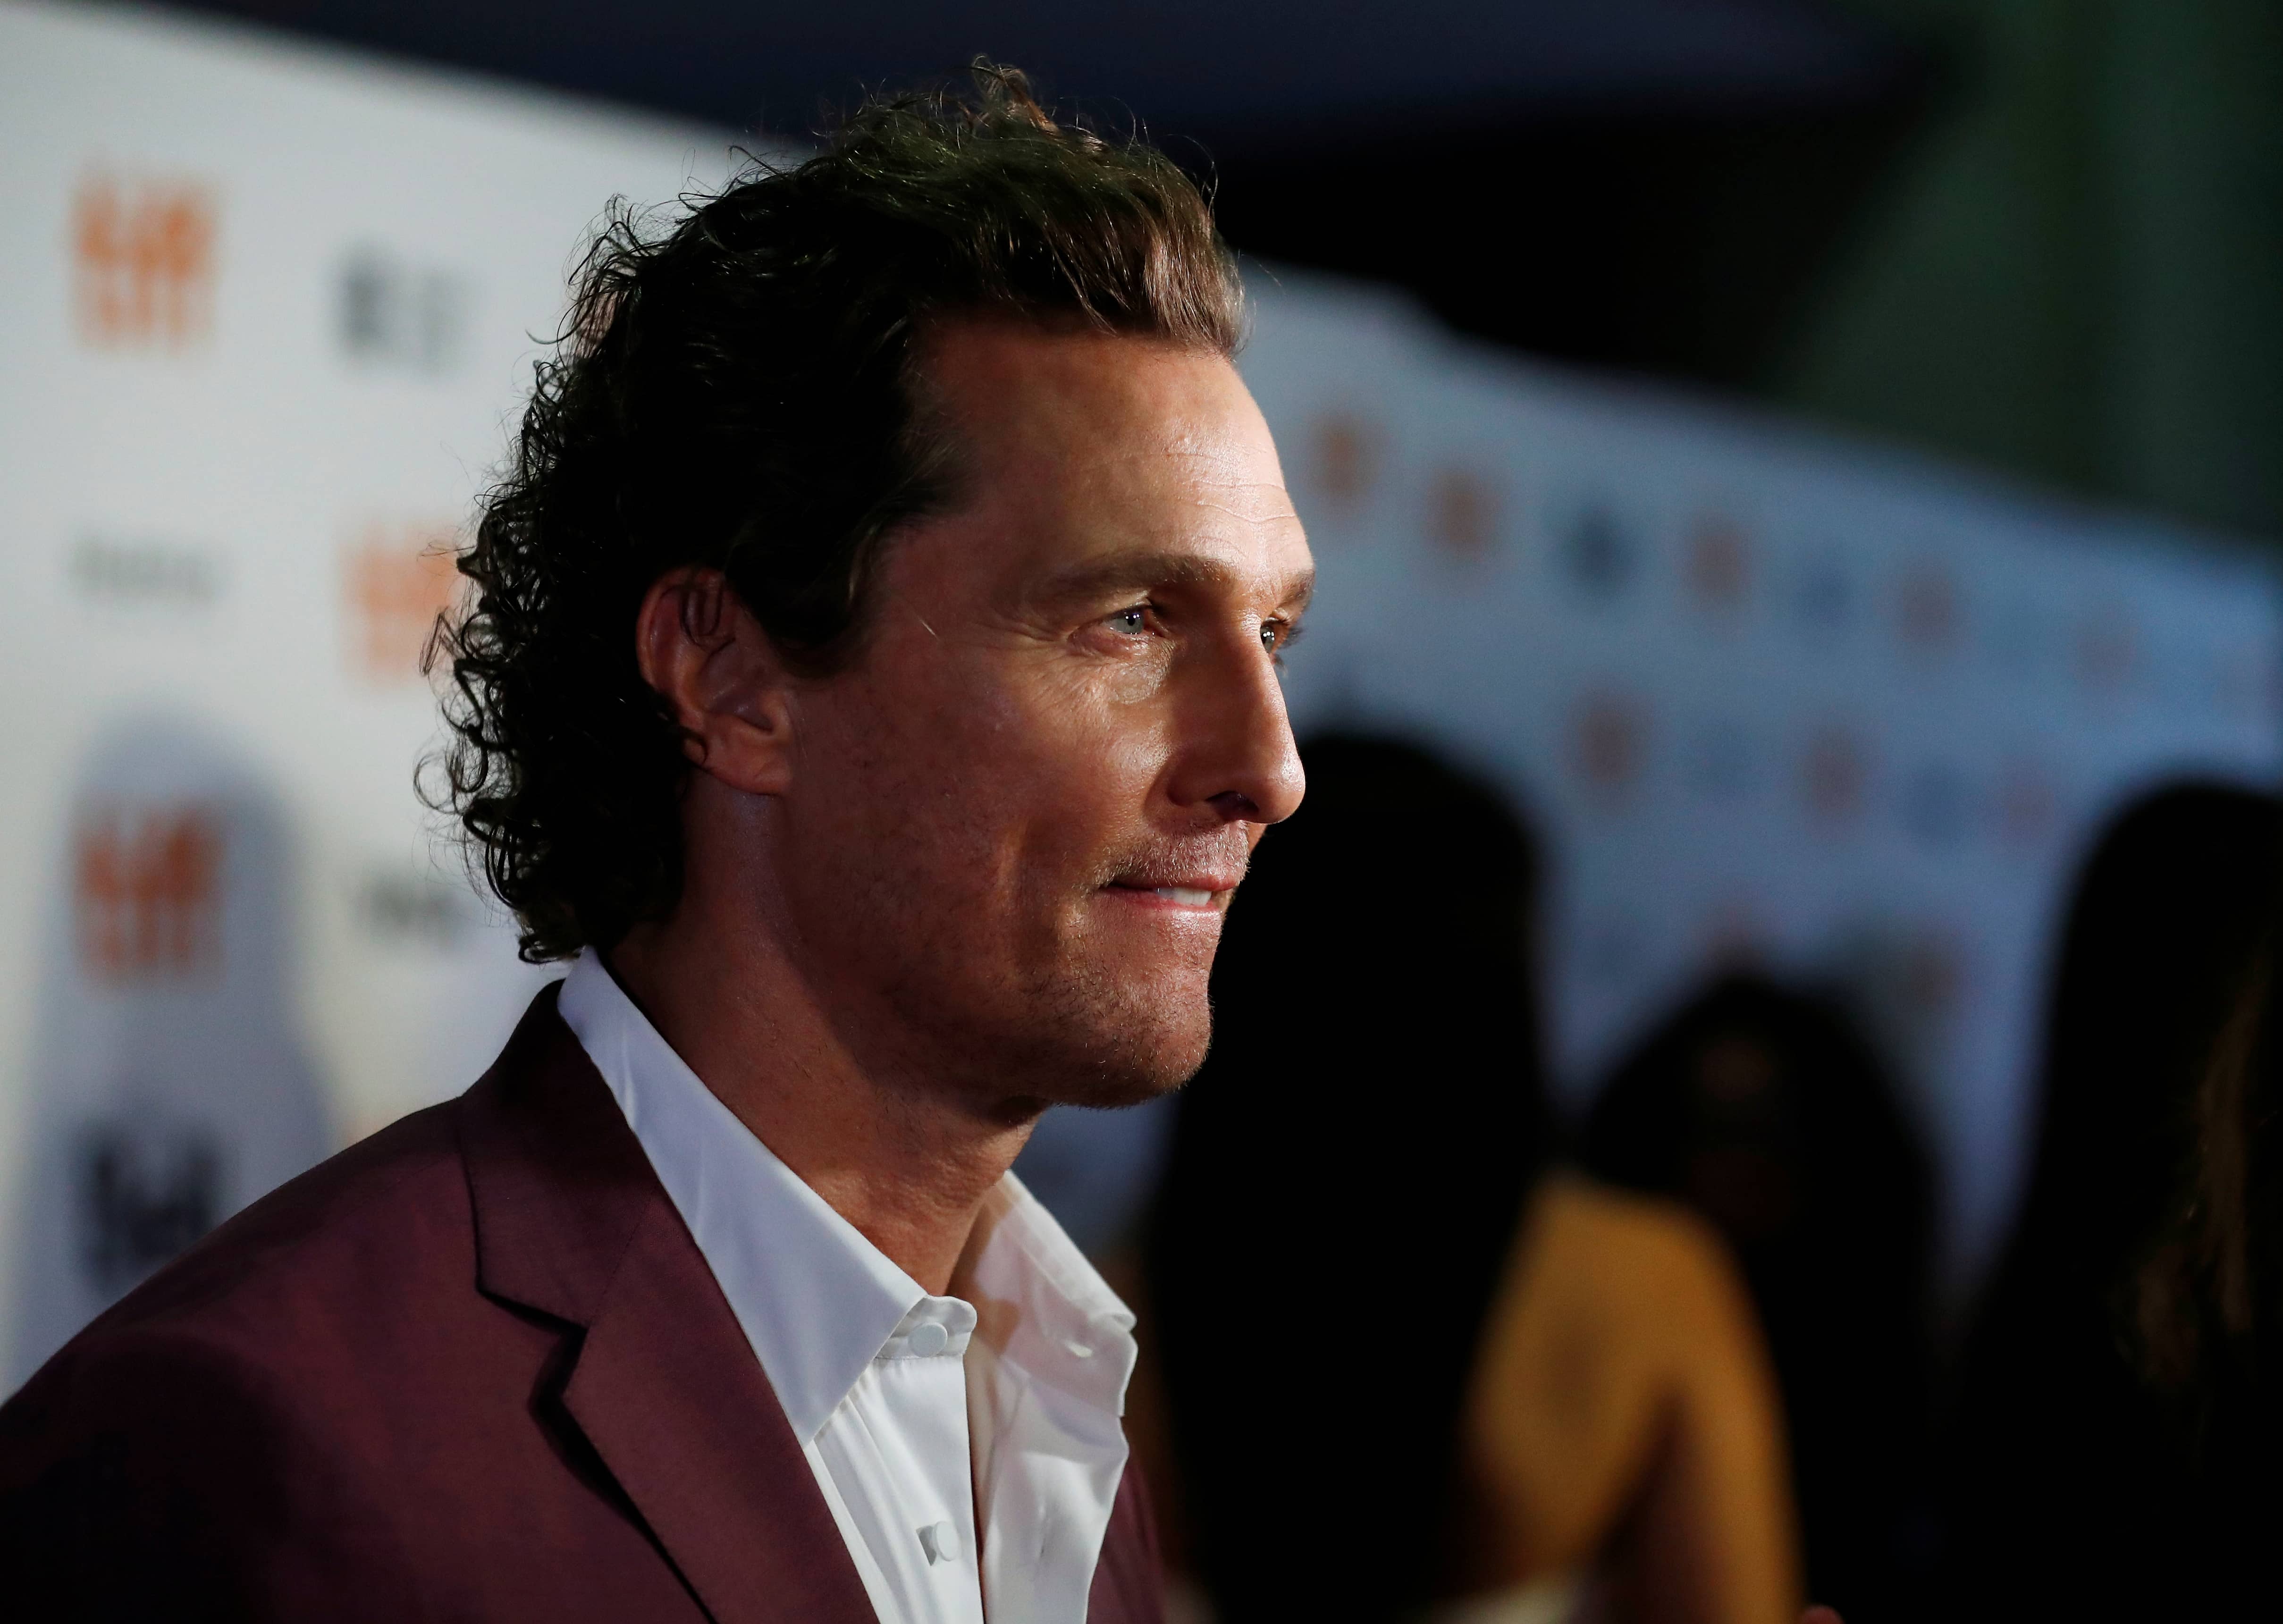 actor-matthew-mcconaughey-arrives-for-the-world-premiere-of-white-boy-rick-at-the-toronto-international-film-festival-tiff-in-toronto